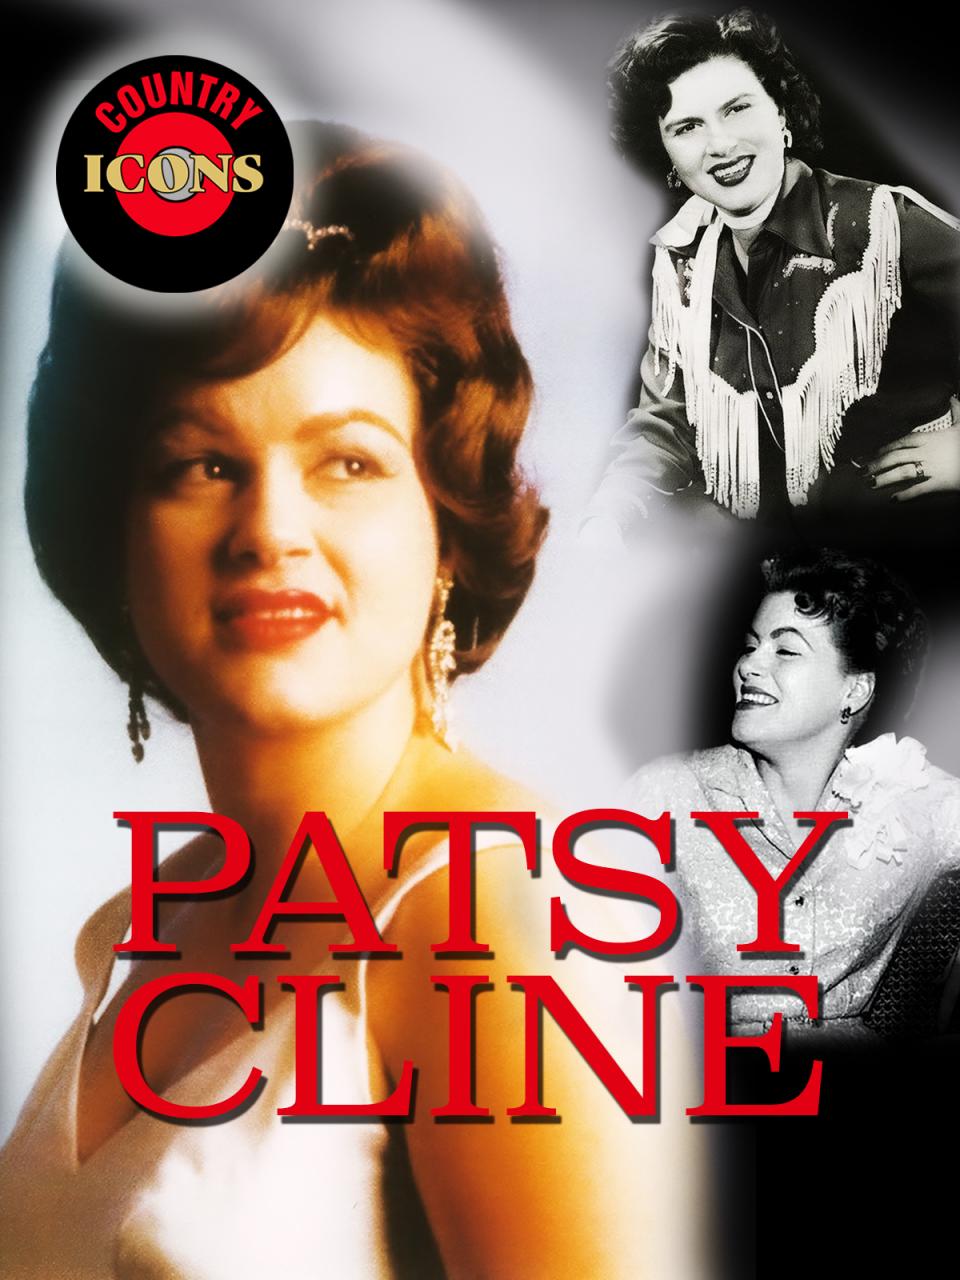 Country Icons: Patsy Kline